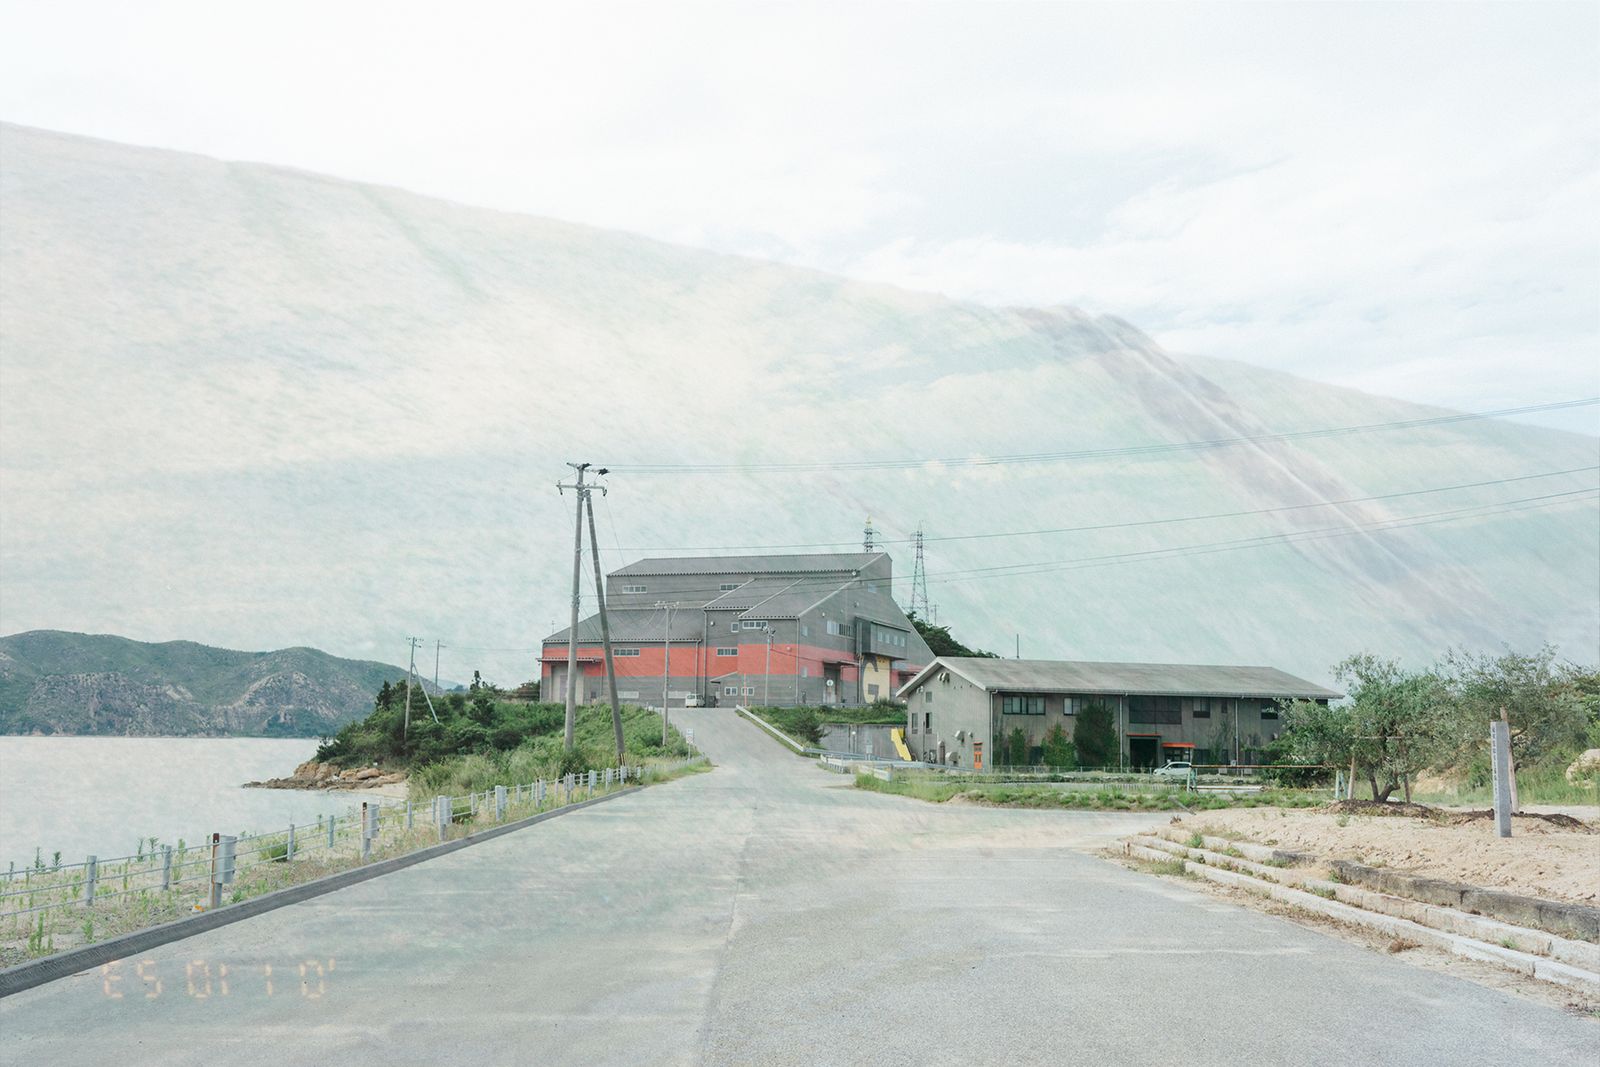 © Maki Hayashida - Image from the Almost Transparent Isalnd photography project